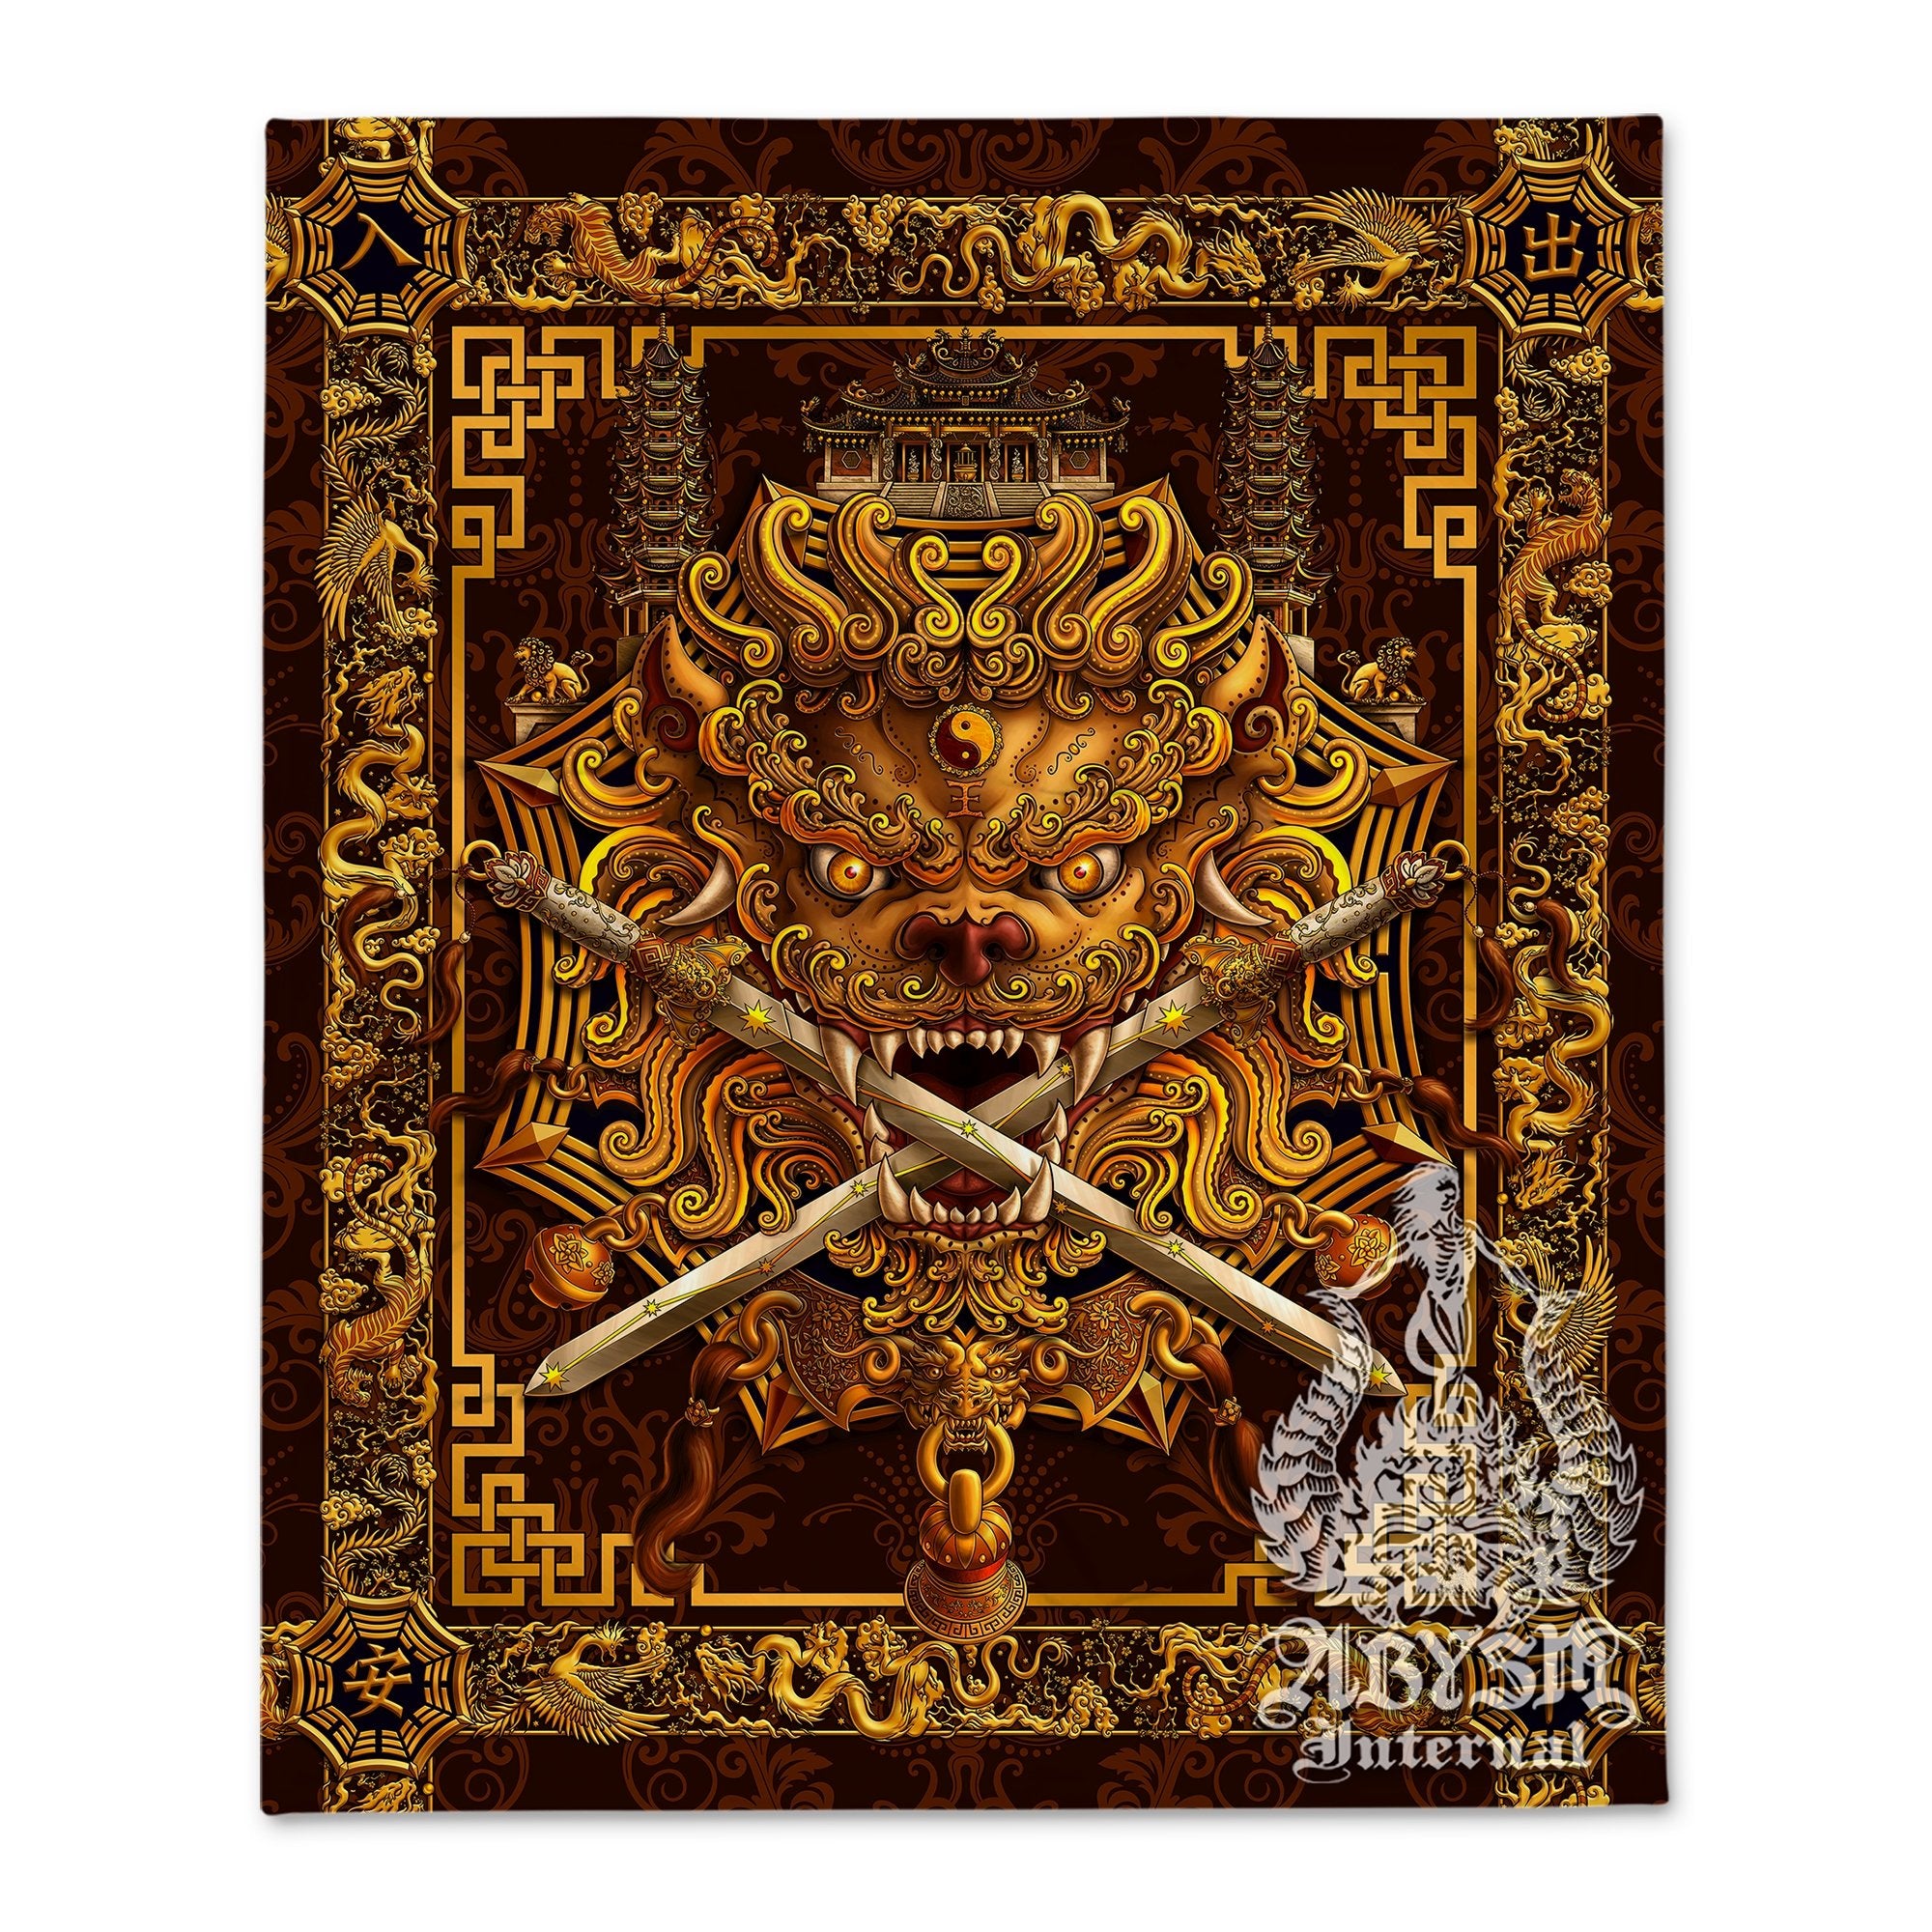 Lion Tapestry, Taiwan Sword Lion, Chinese Wall Hanging, Gamer Home Decor,  Asian Mythology - Gold